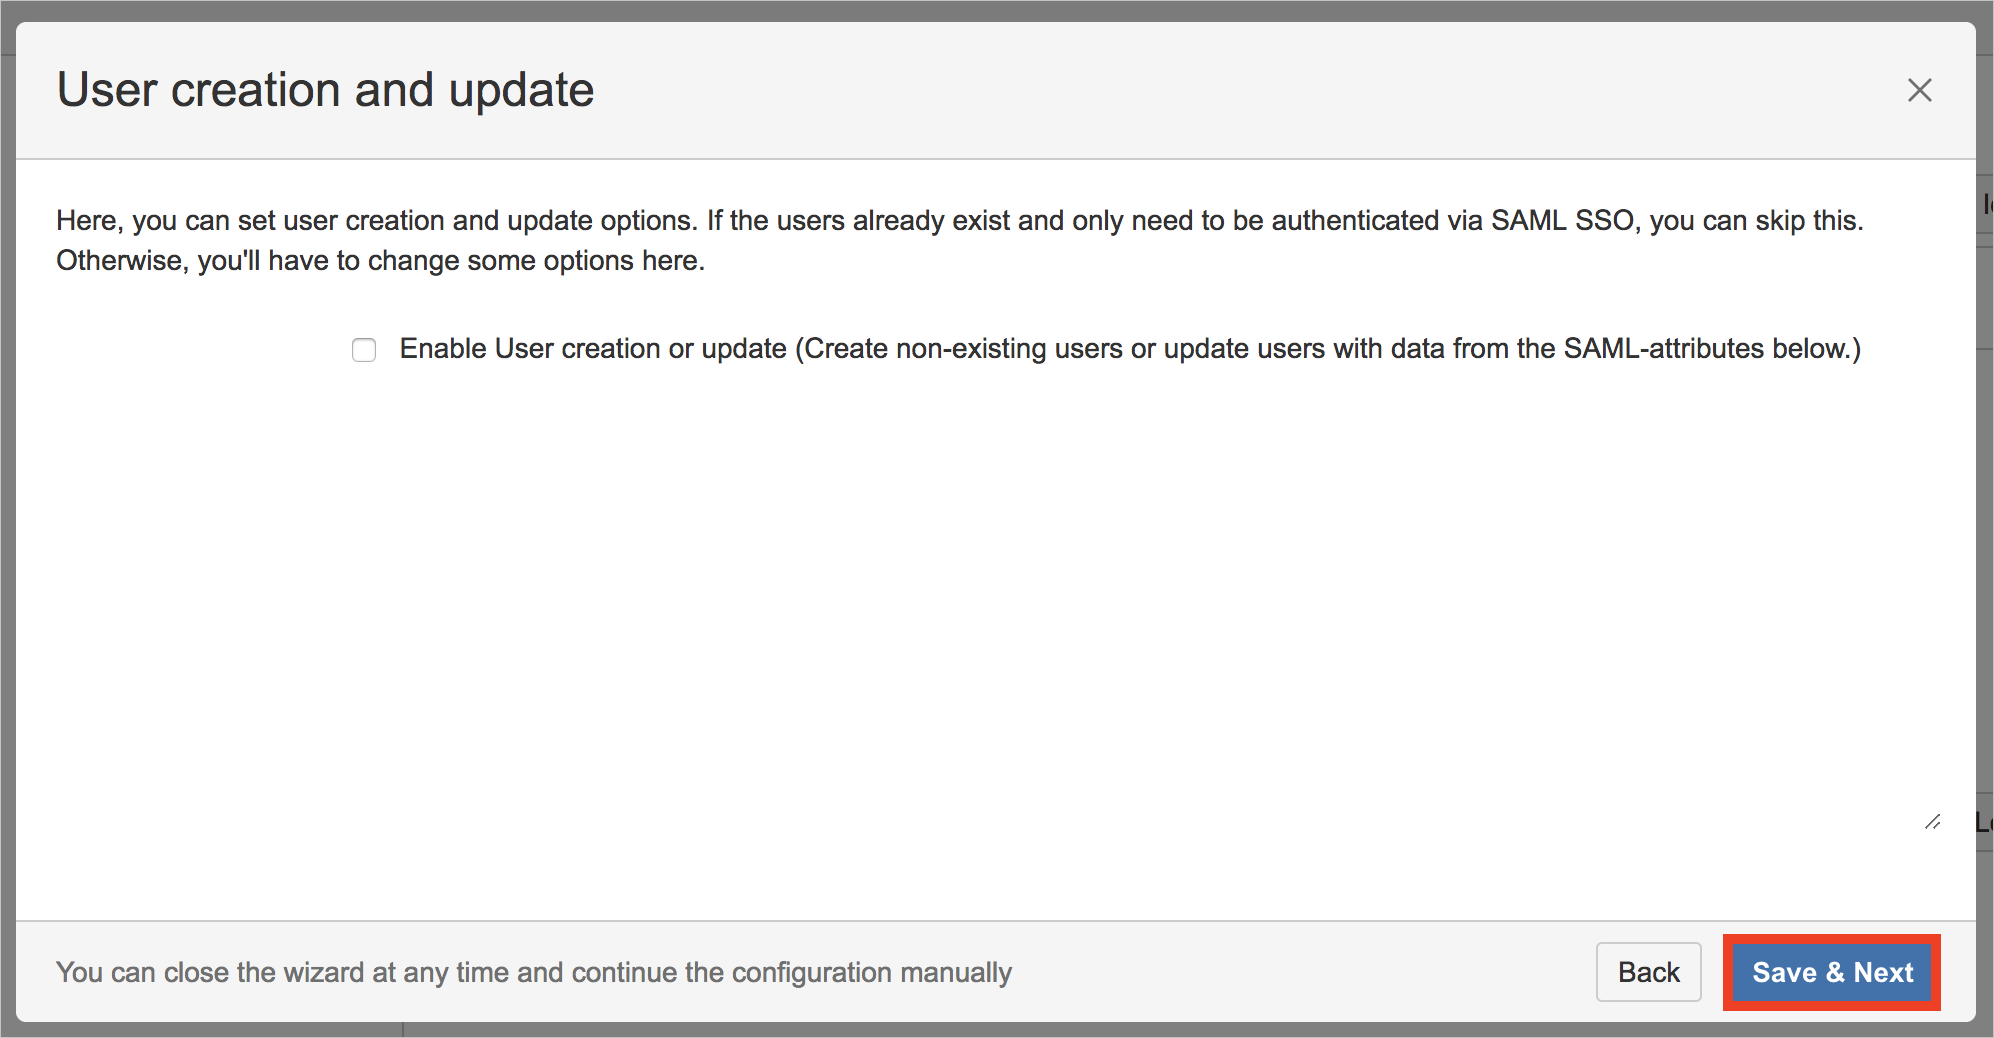 Screenshot that shows the "User creation and update" page with the "Save & Next" button selected.